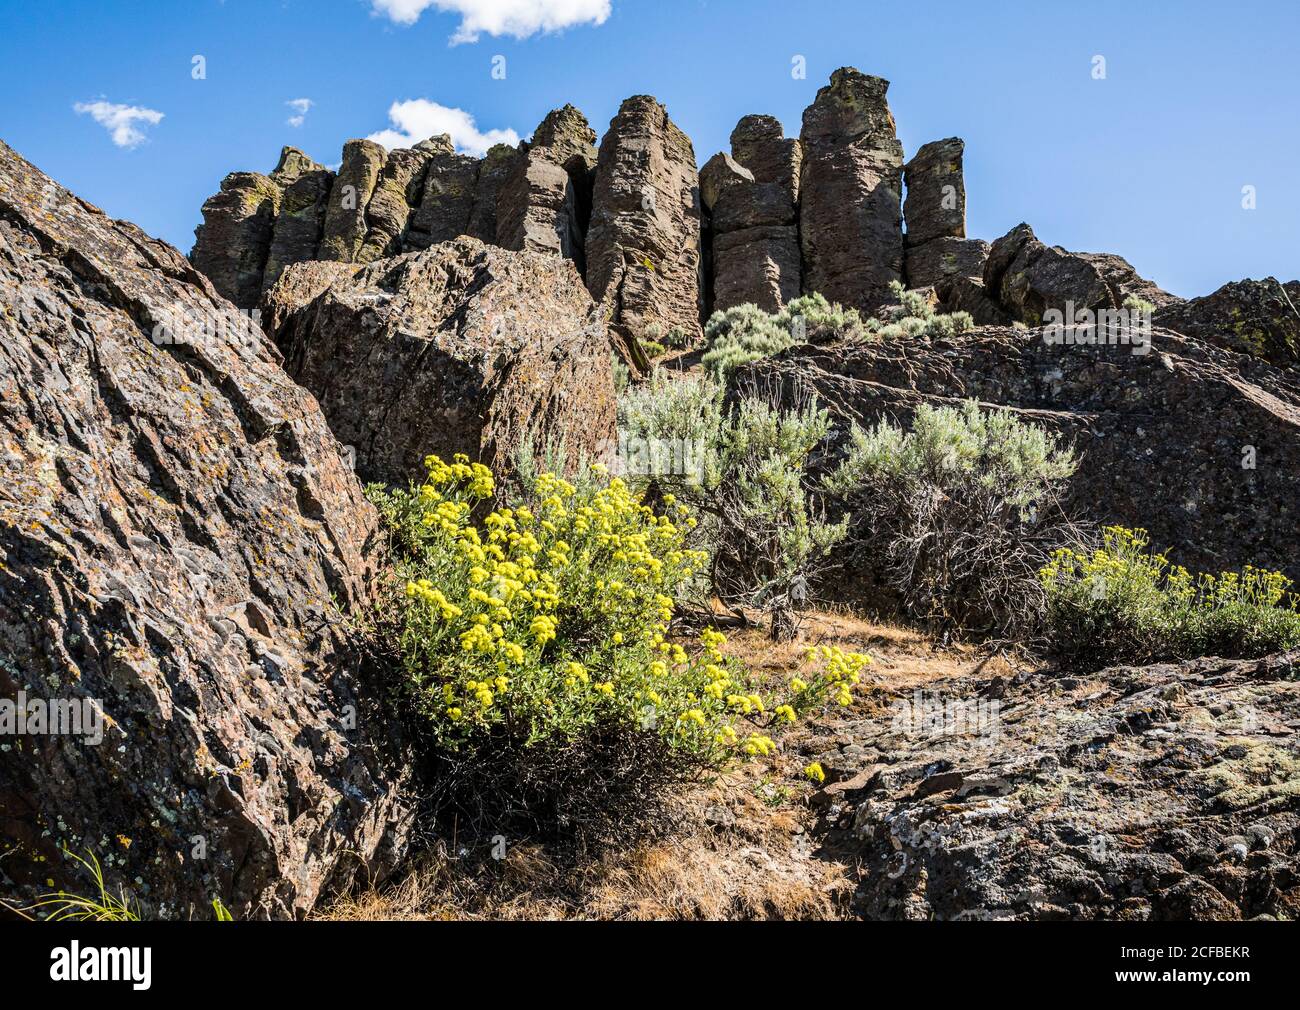 'The Feathers' rock formation at Frenchmans Coulee in Eastern Washington, USA Stock Photo